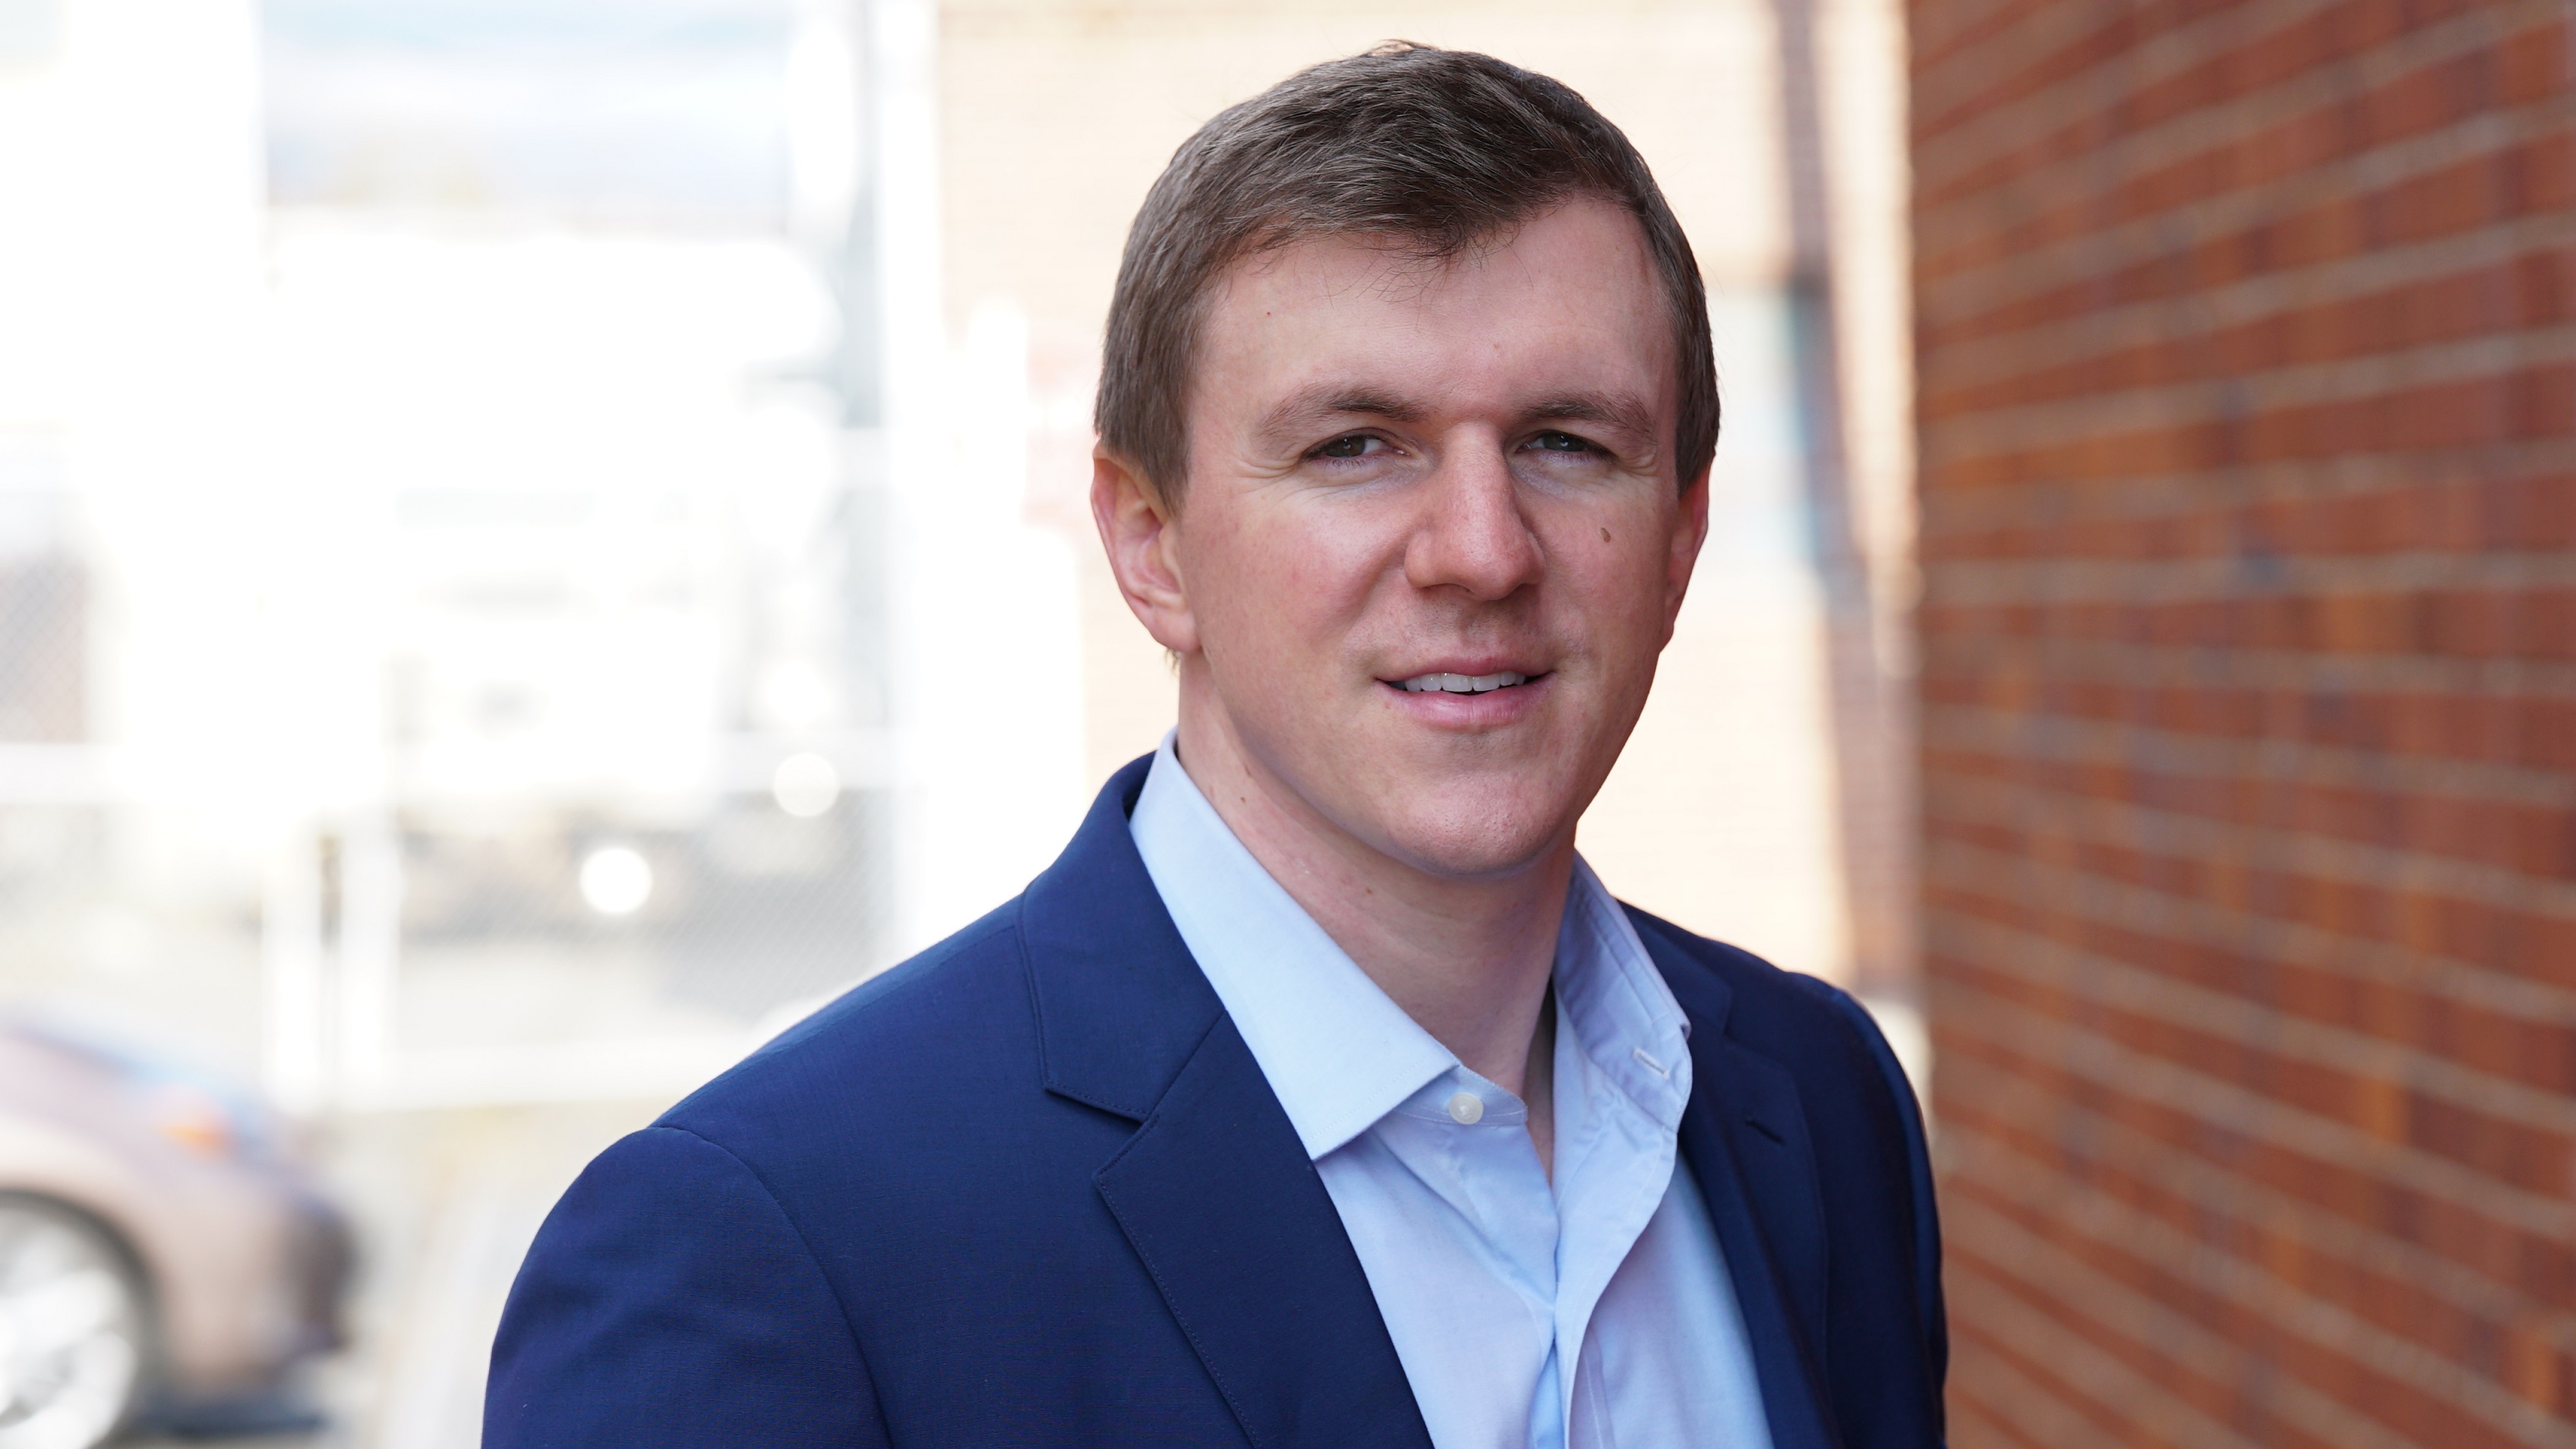 James O'Keefe, founder of Project Veritas Action